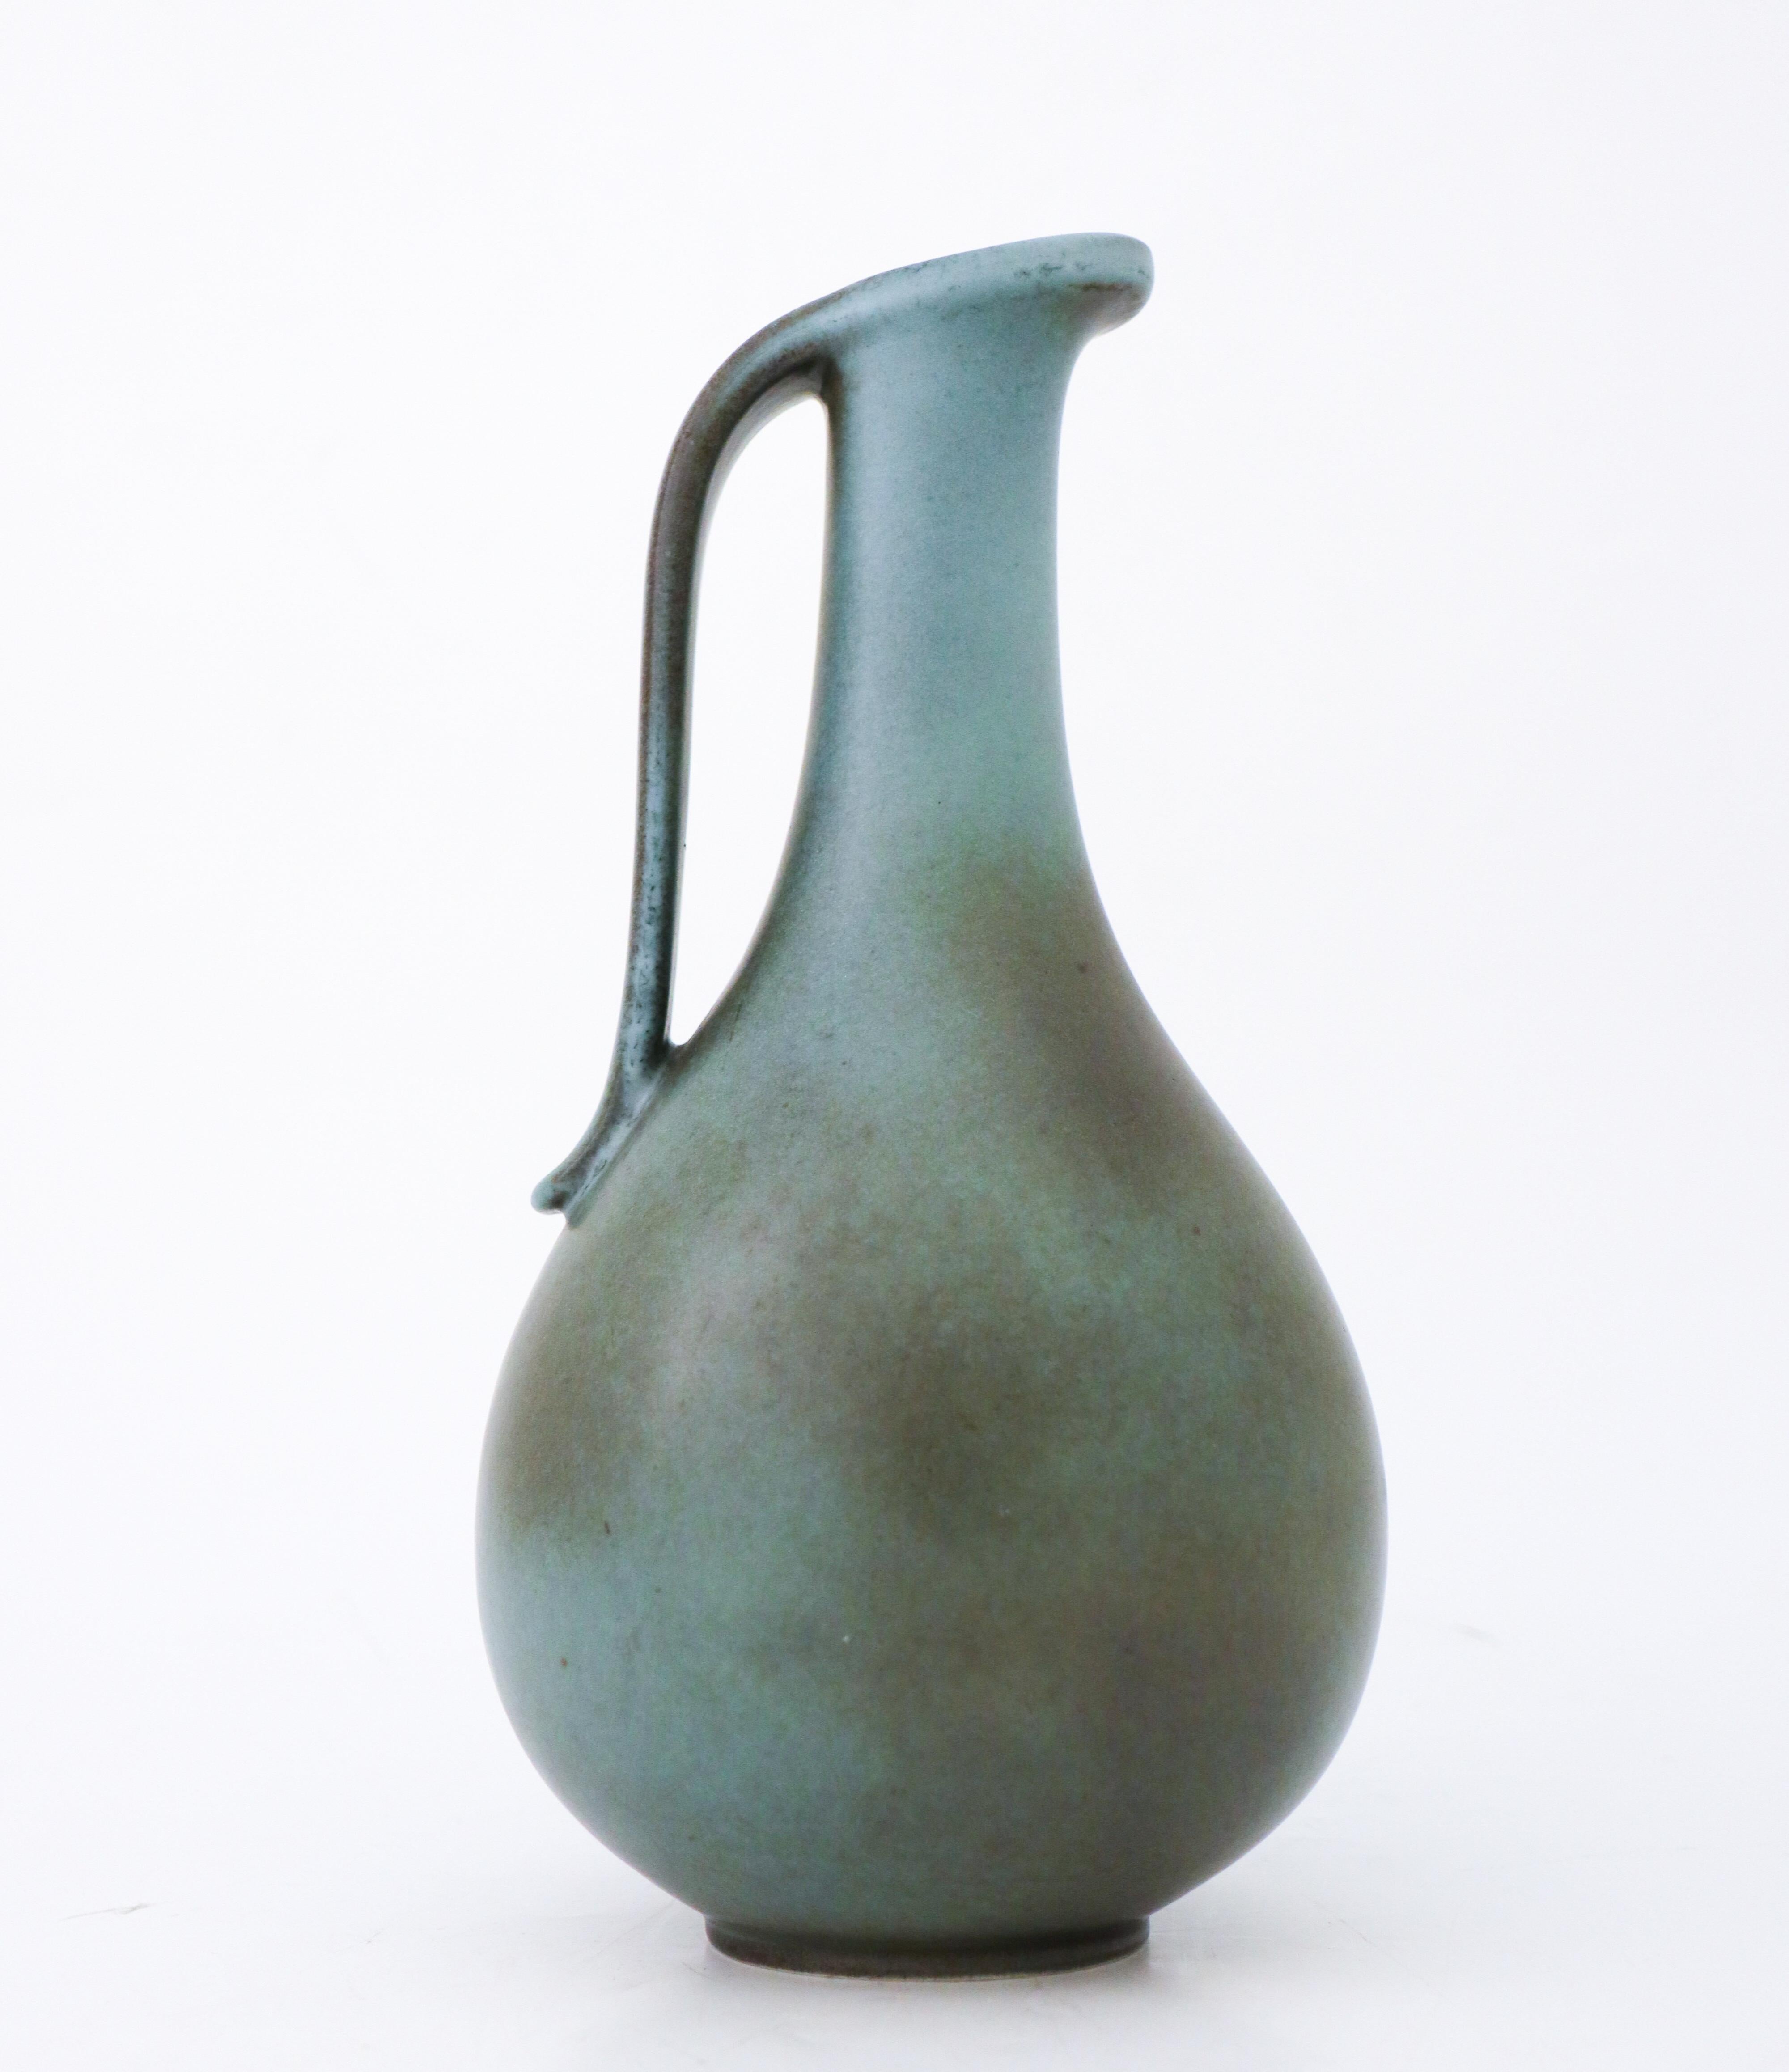 A lovely green/turquoise vase designed by Gunnar Nylund at Rörstrand, it´s 24.5 cm (7